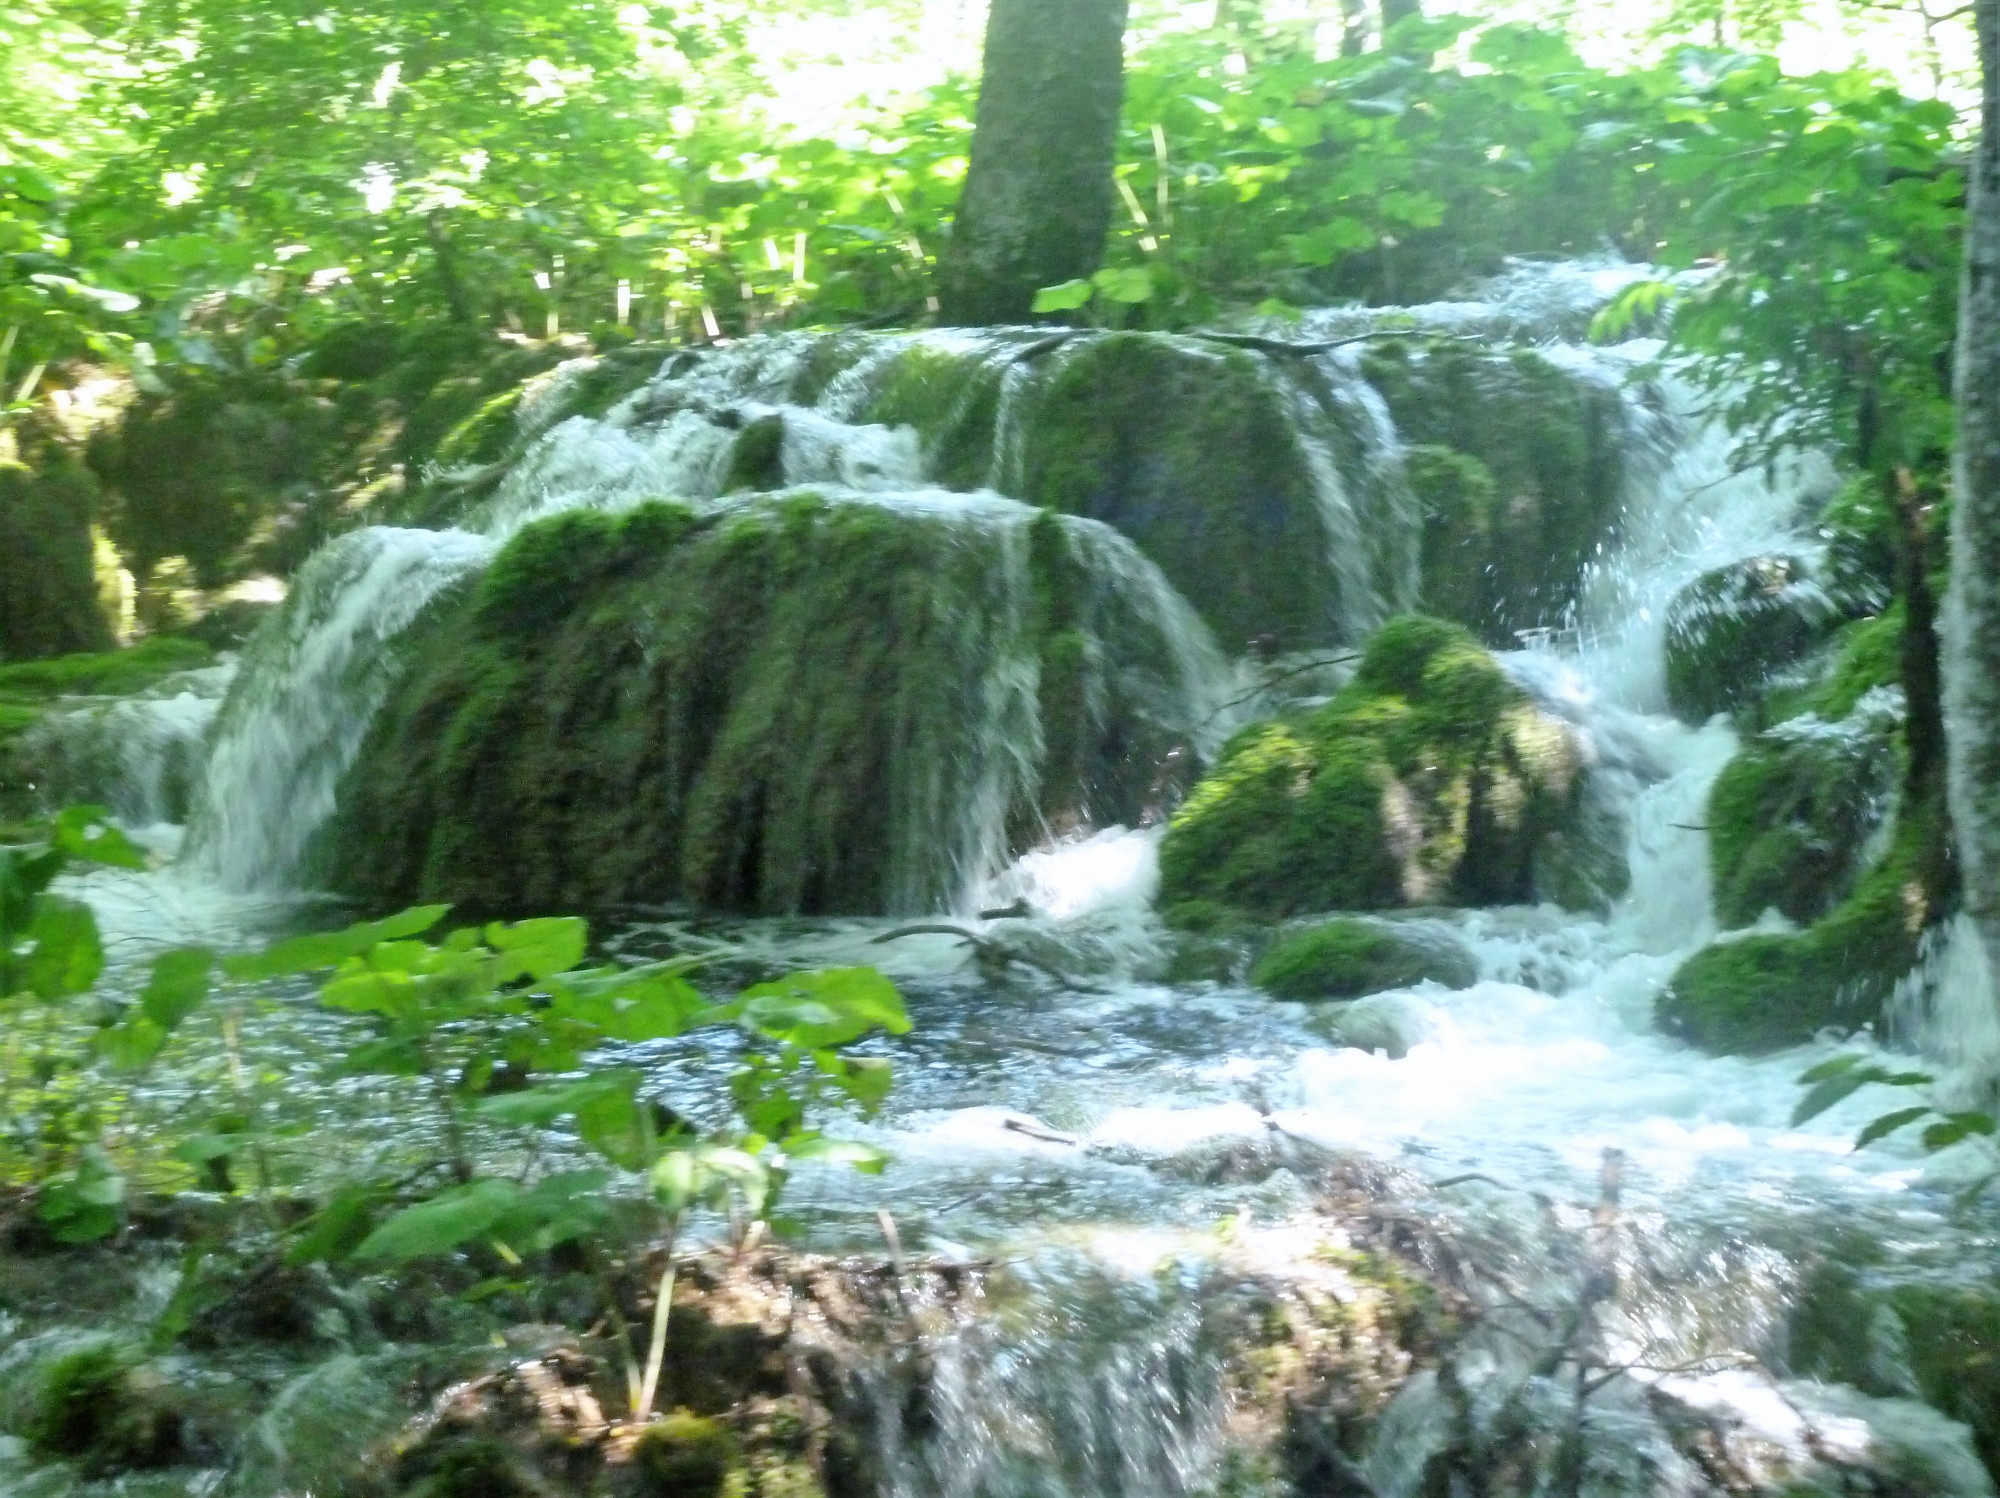 Small waterfalls with rocks and moss